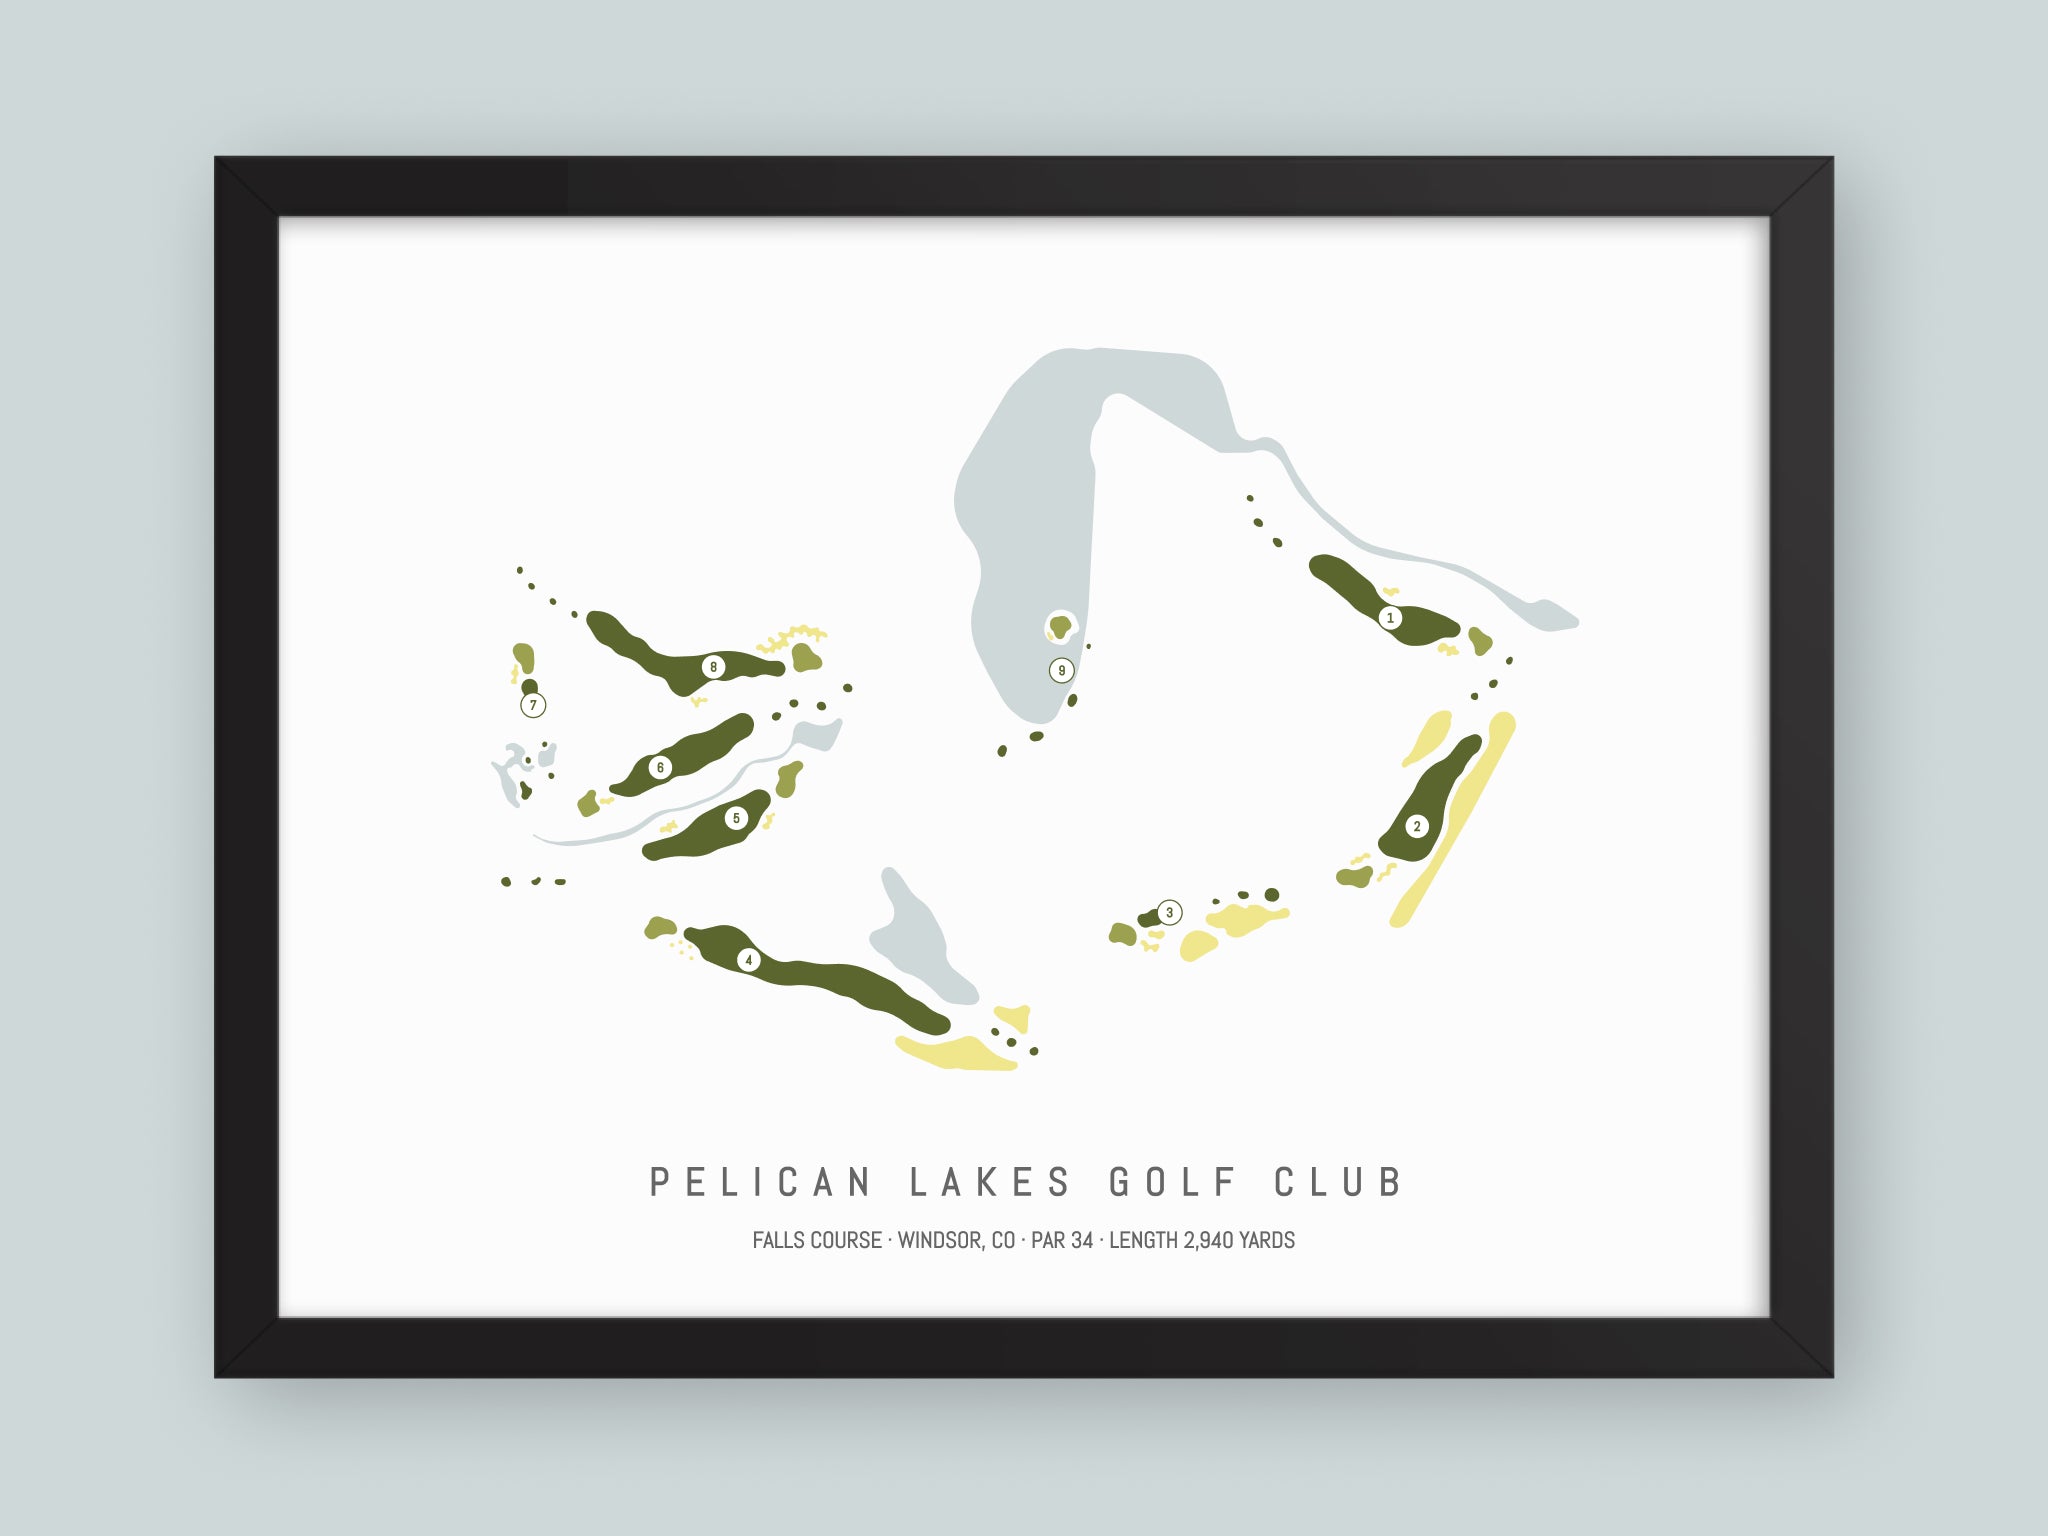 Pelican-Lakes-Golf-Club-Falls-Course-CO--Black-Frame-24x18-With-Hole-Numbers